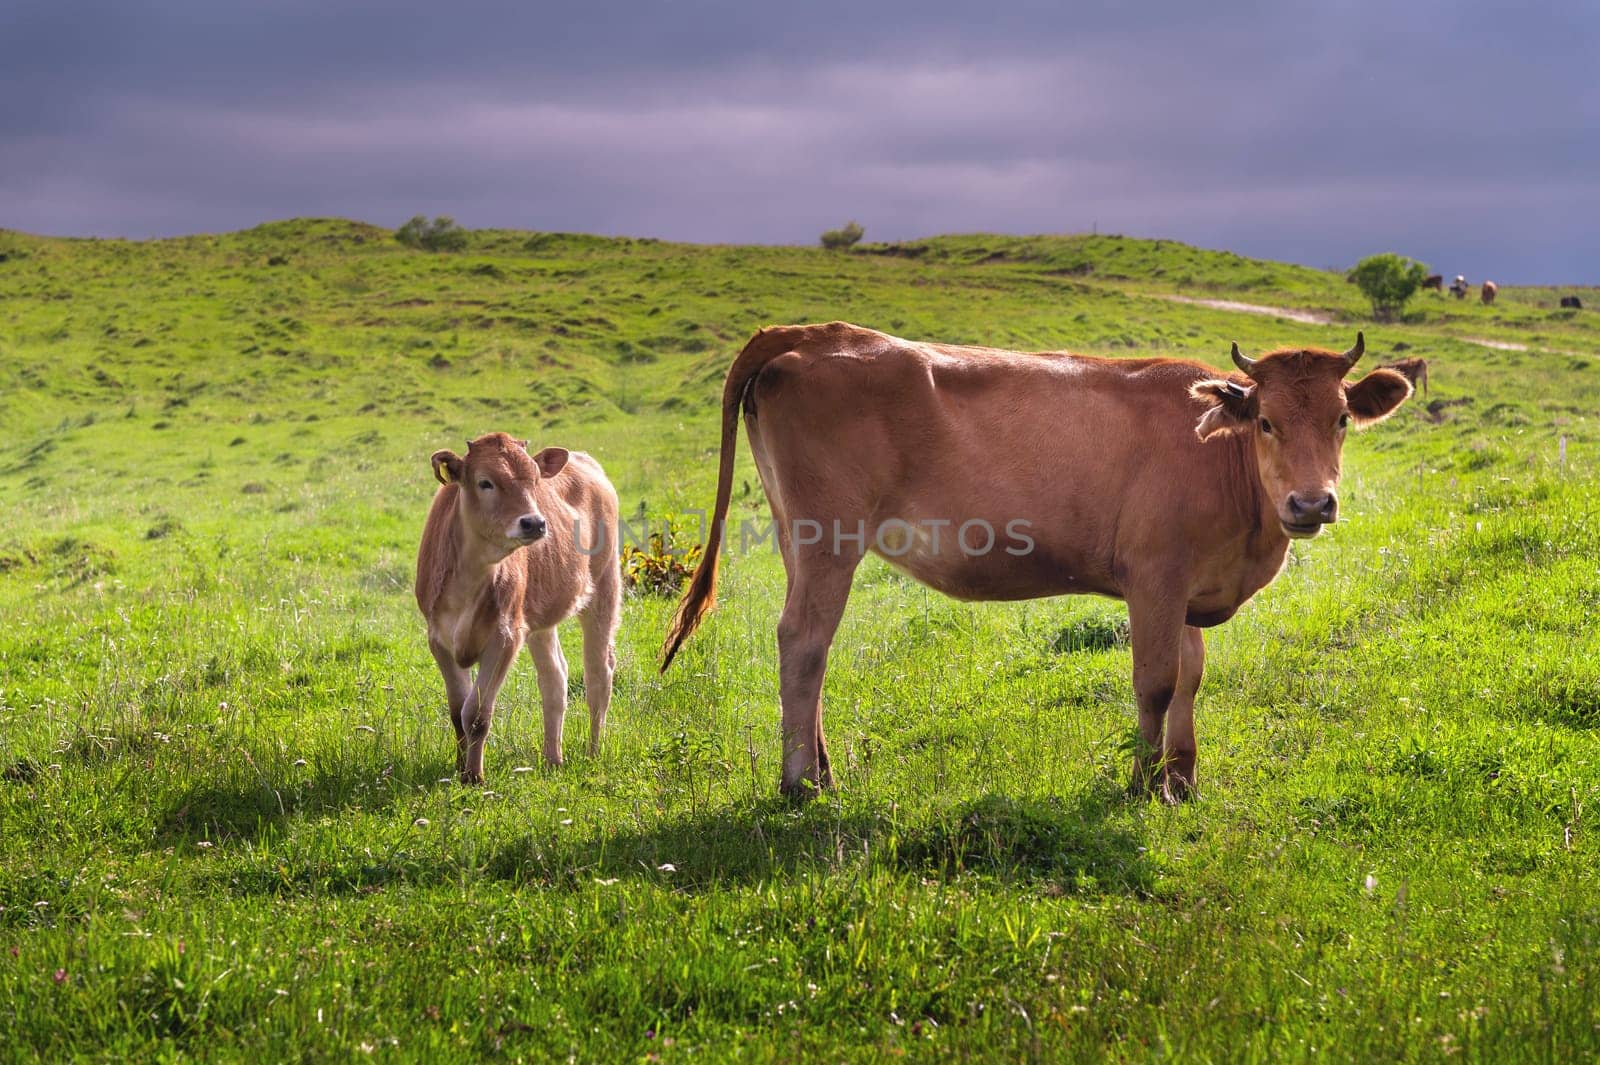 The cow looks into the frame. Cow with calf on green grass pasture. Livestock.